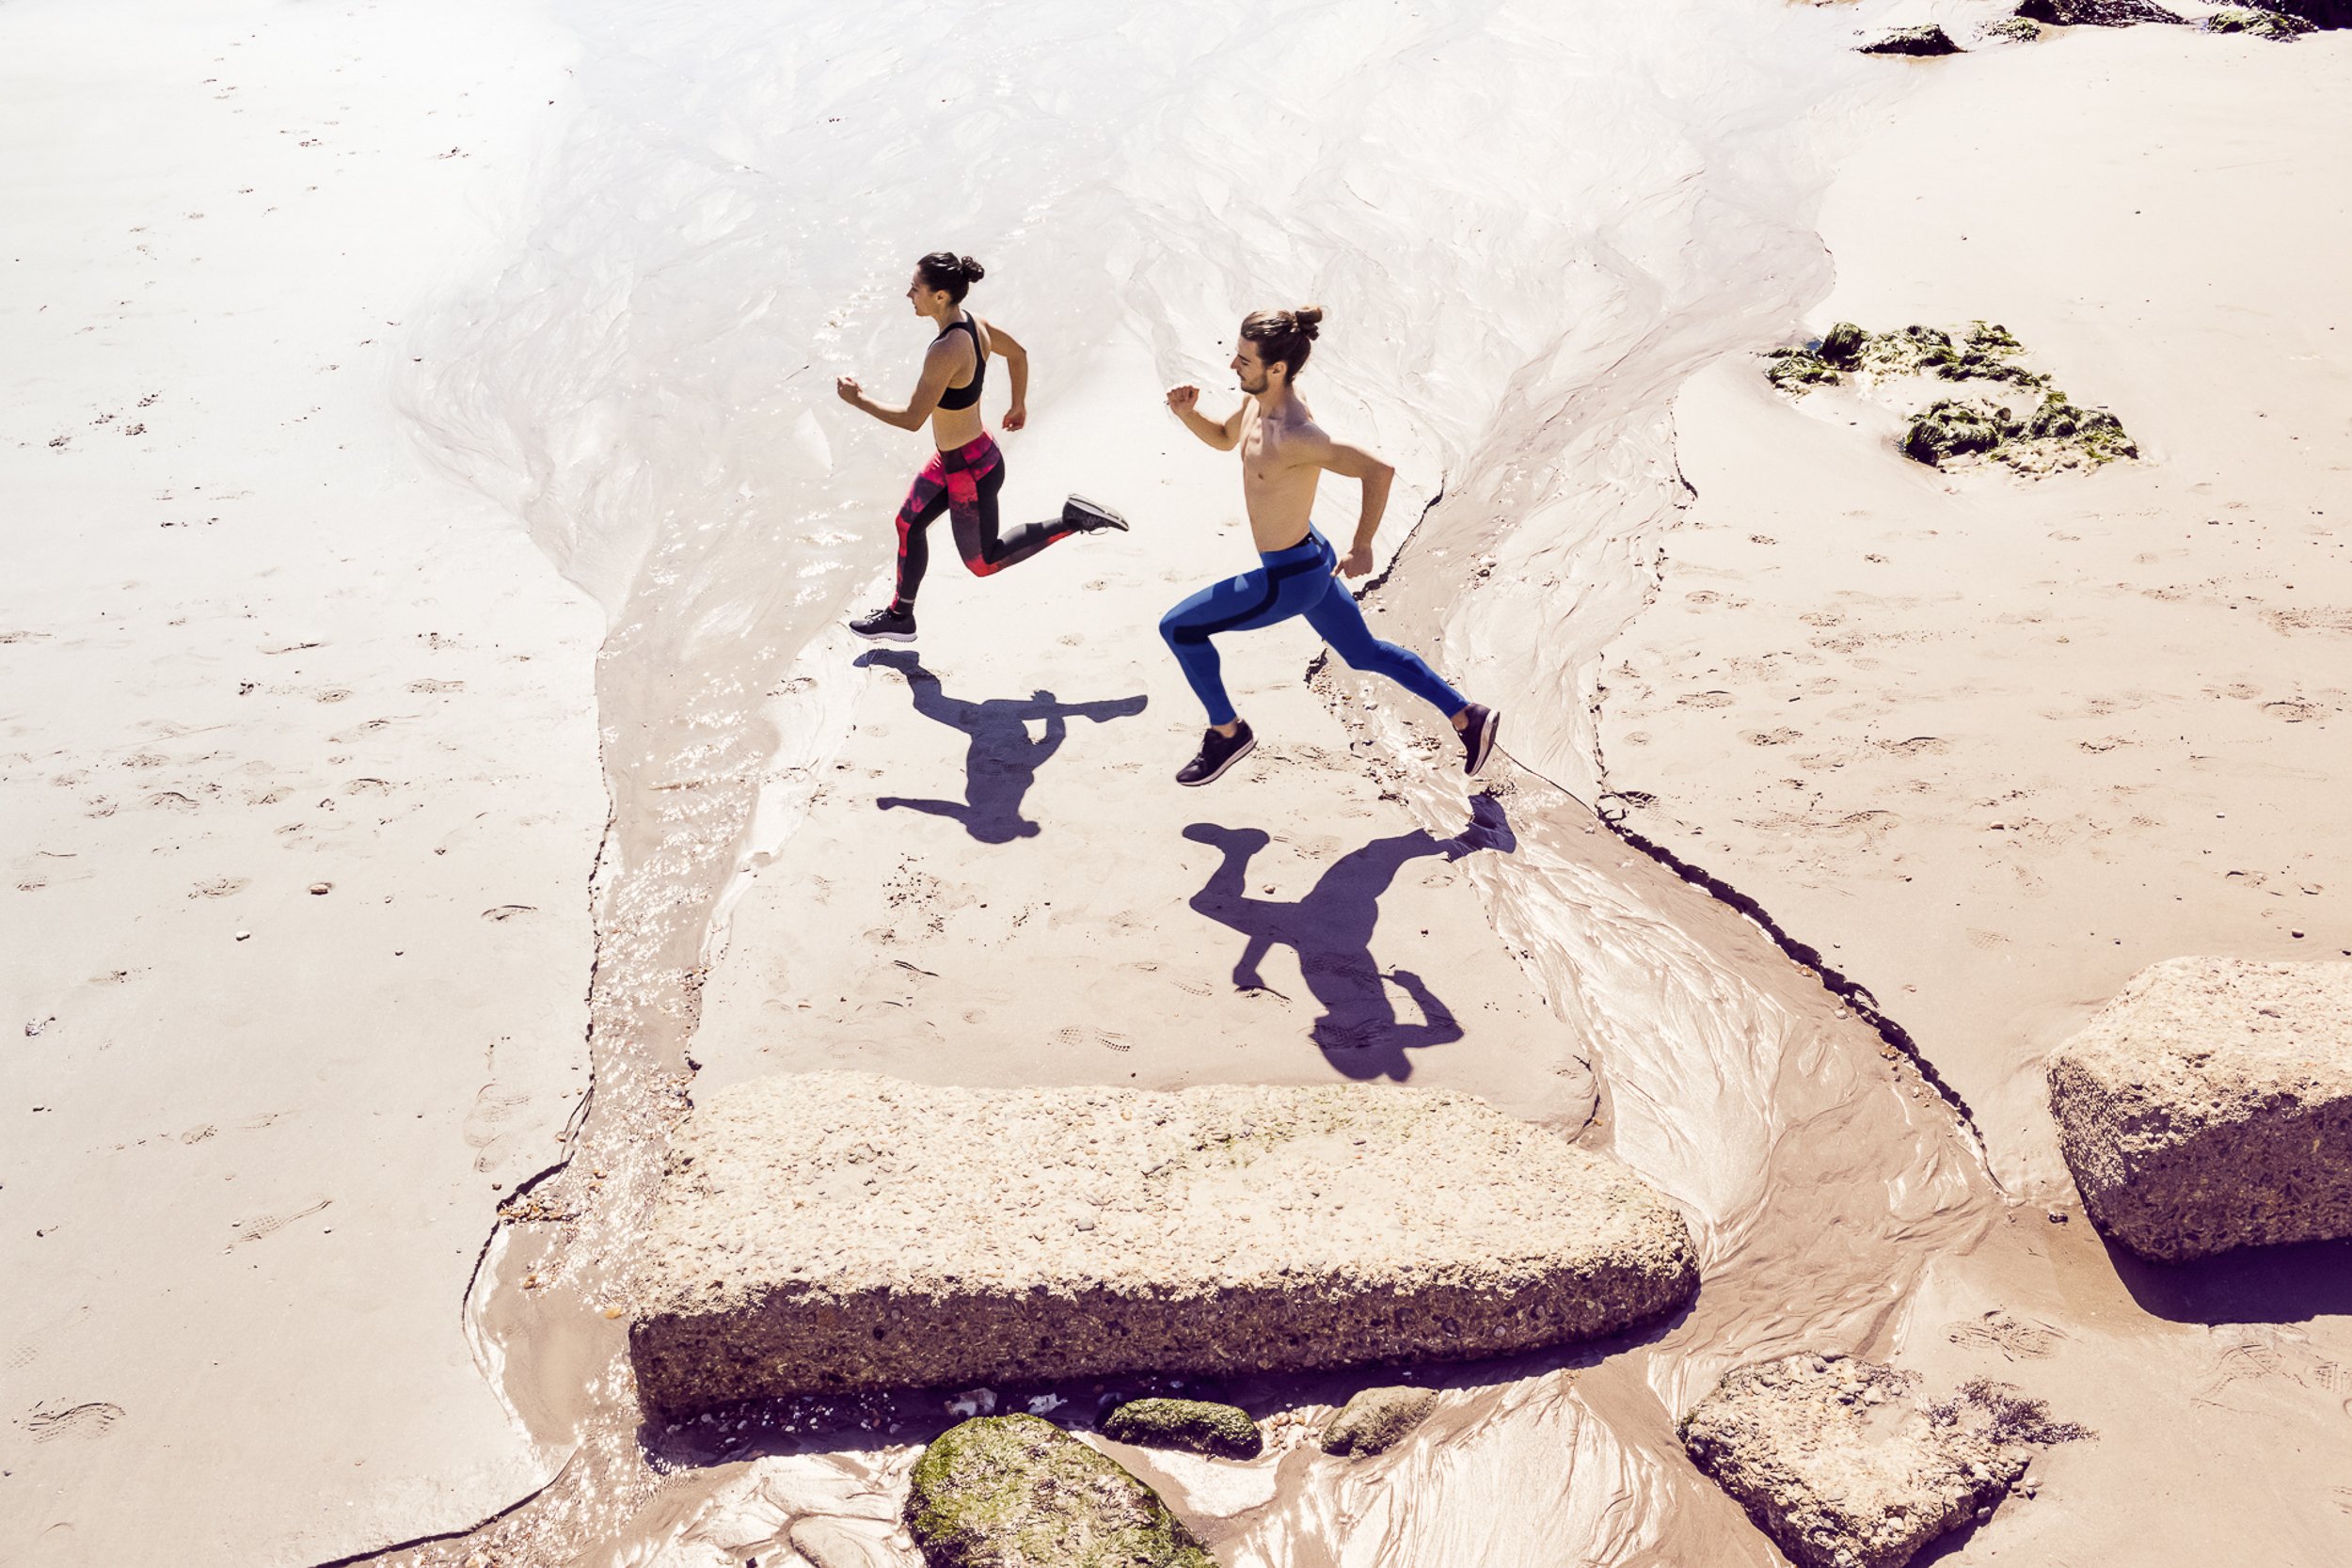 A lifestyle action shot of runners wearing sportswear, running across the sand on a beach.